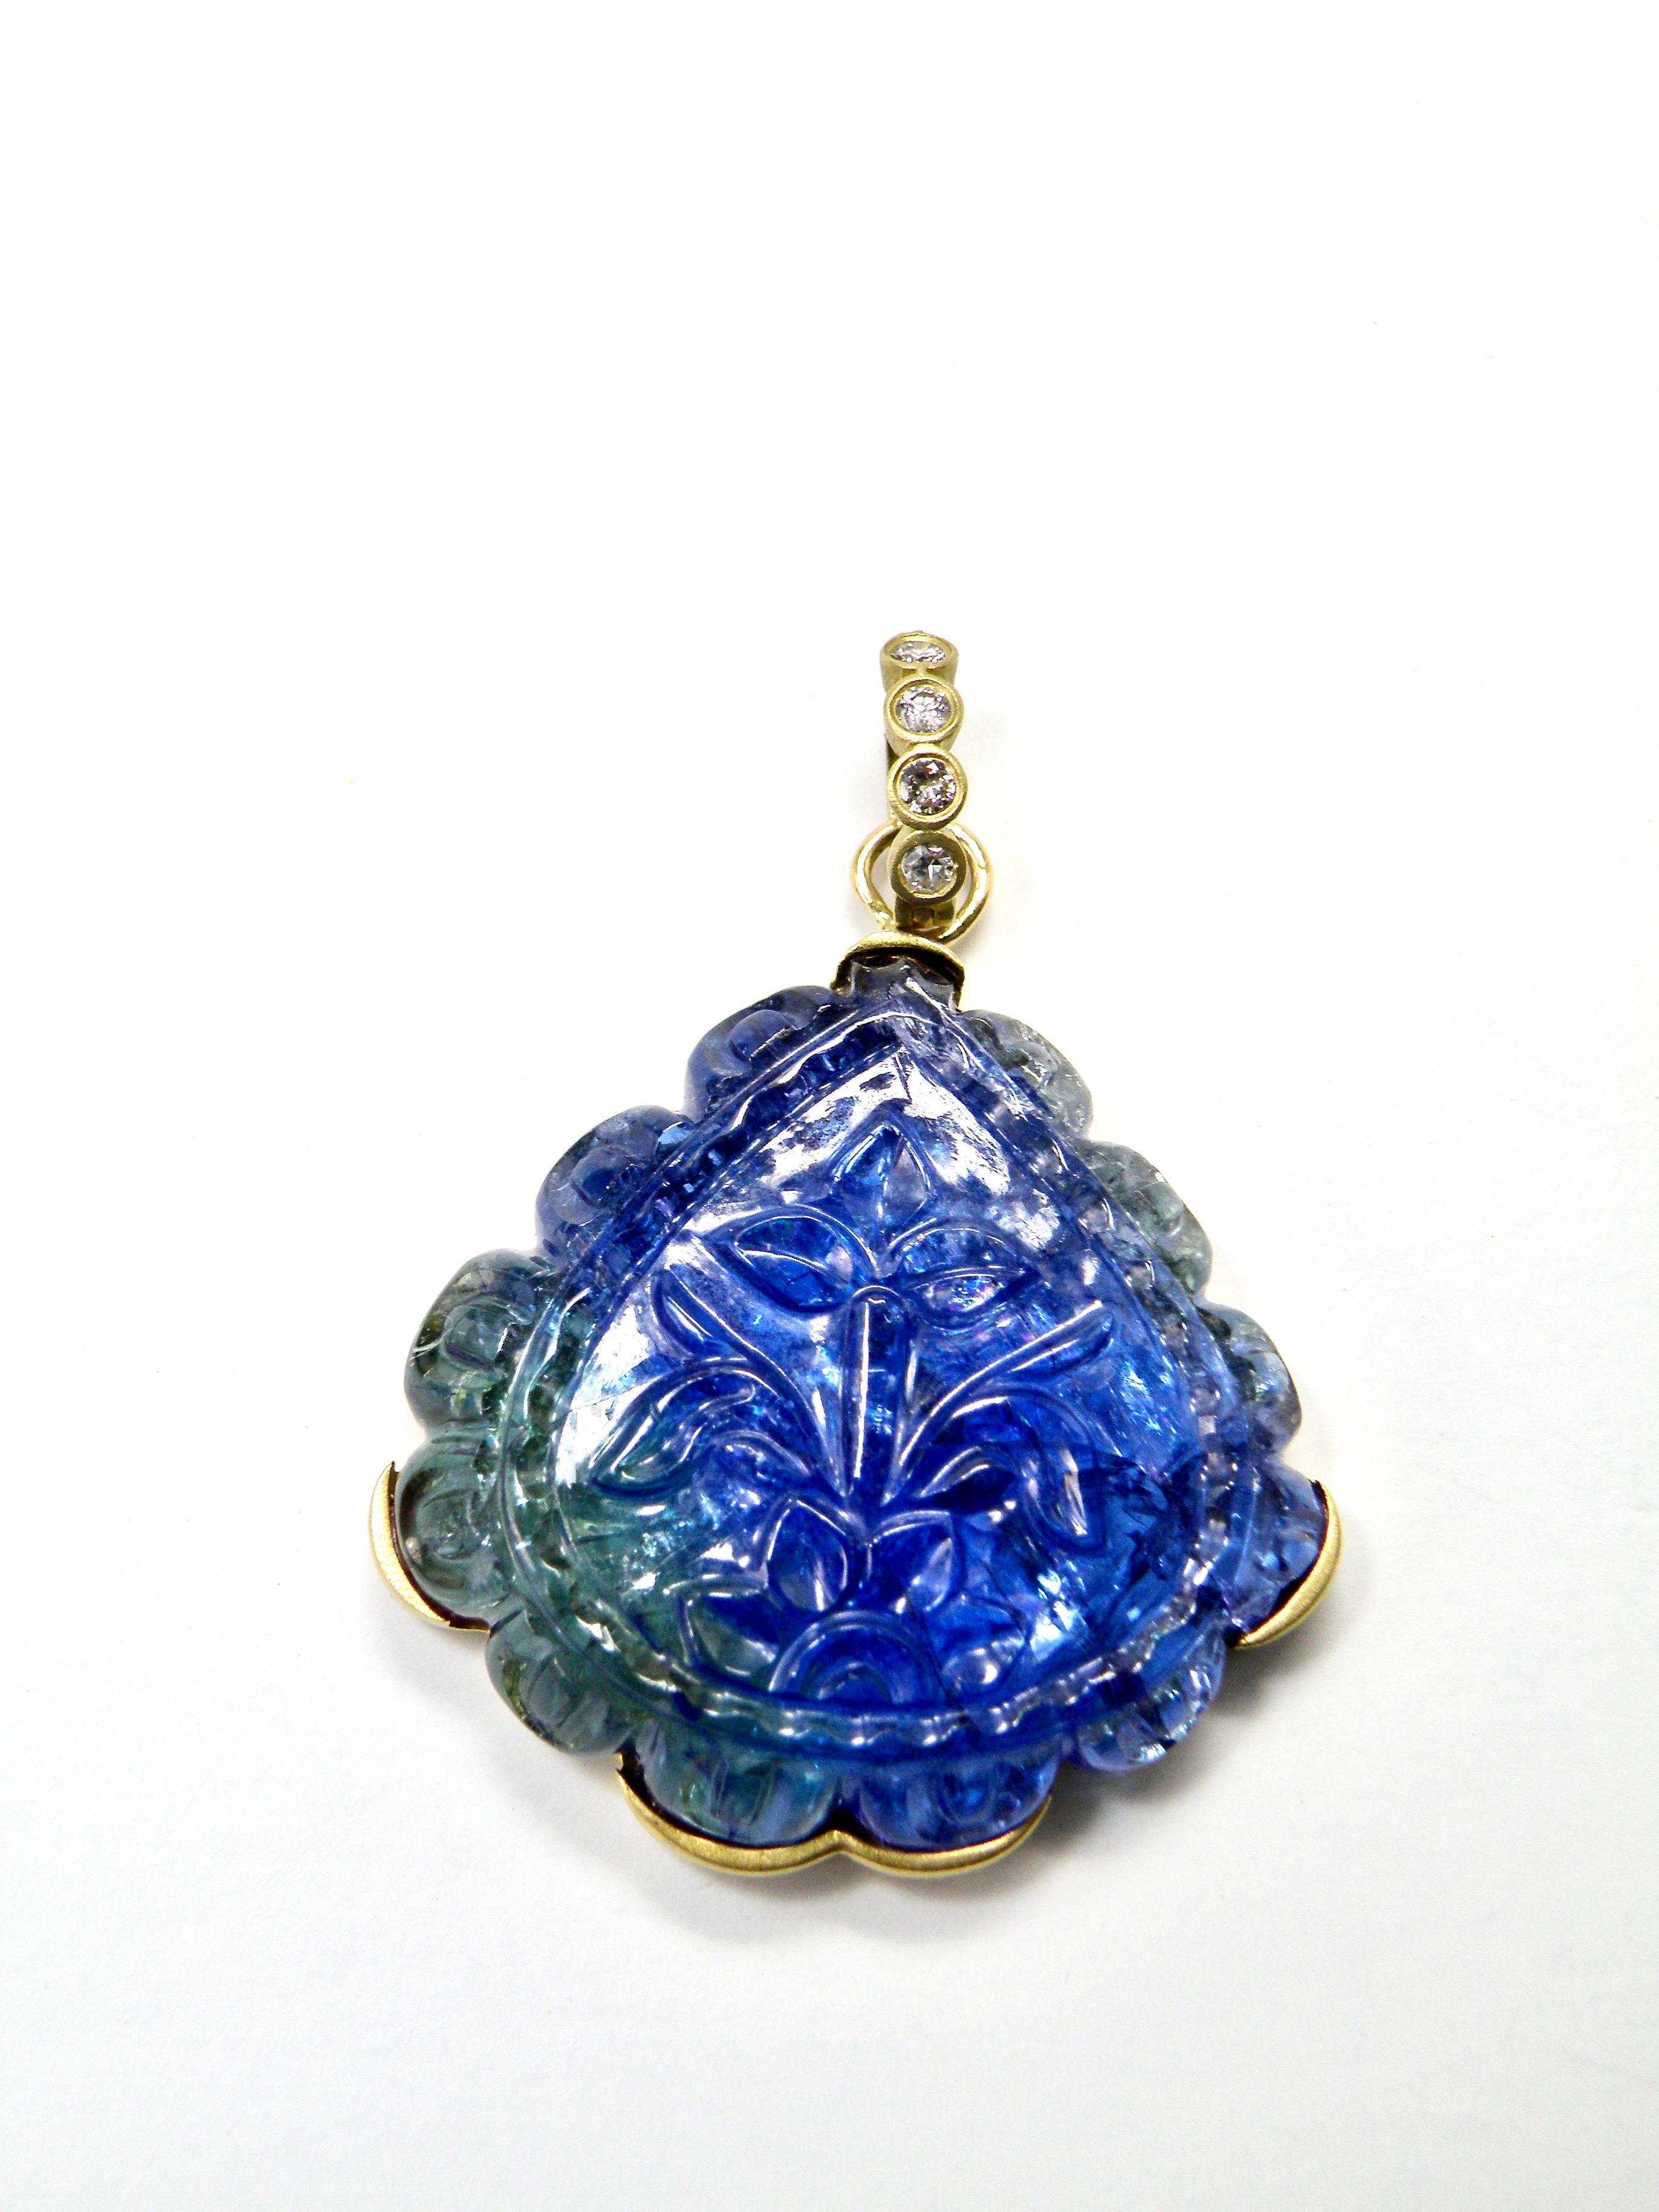 18K rare blue green carved tanzanite pendat with sapphire bail 2x2